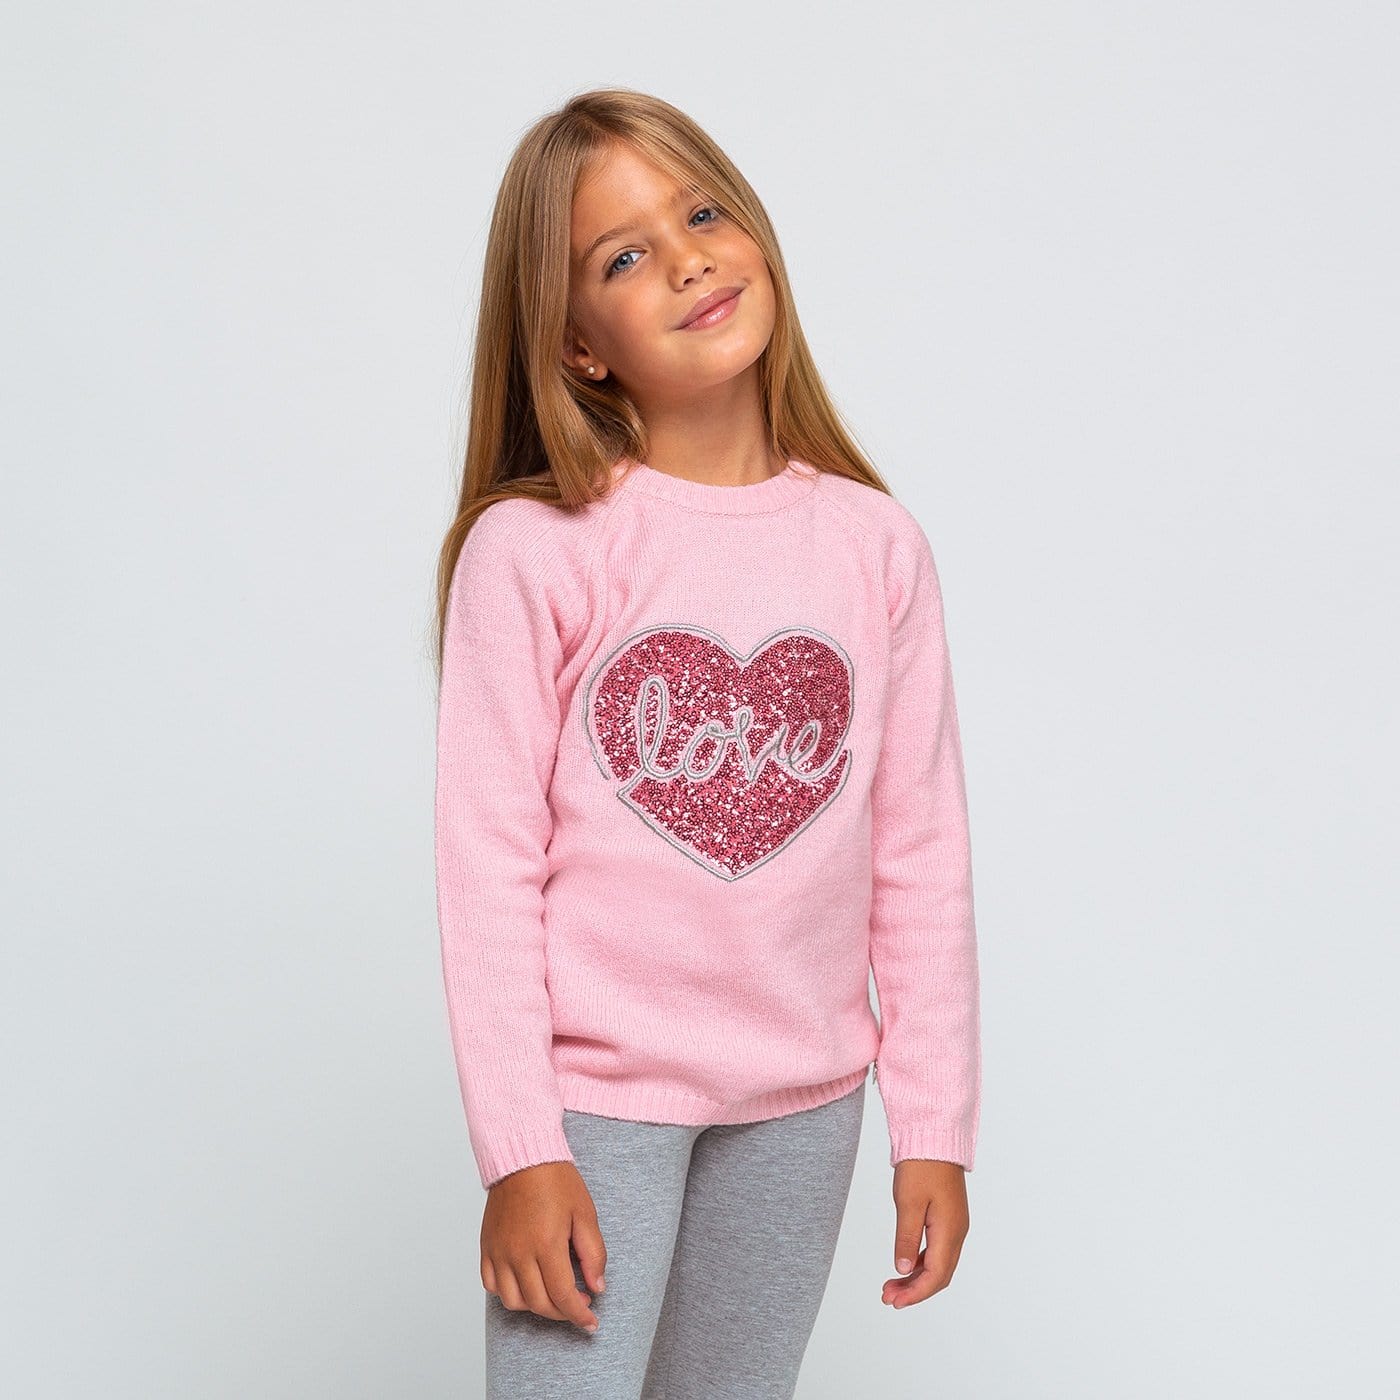 CONGUITOS TEXTIL Clothing Girl's Pink Love Jersey